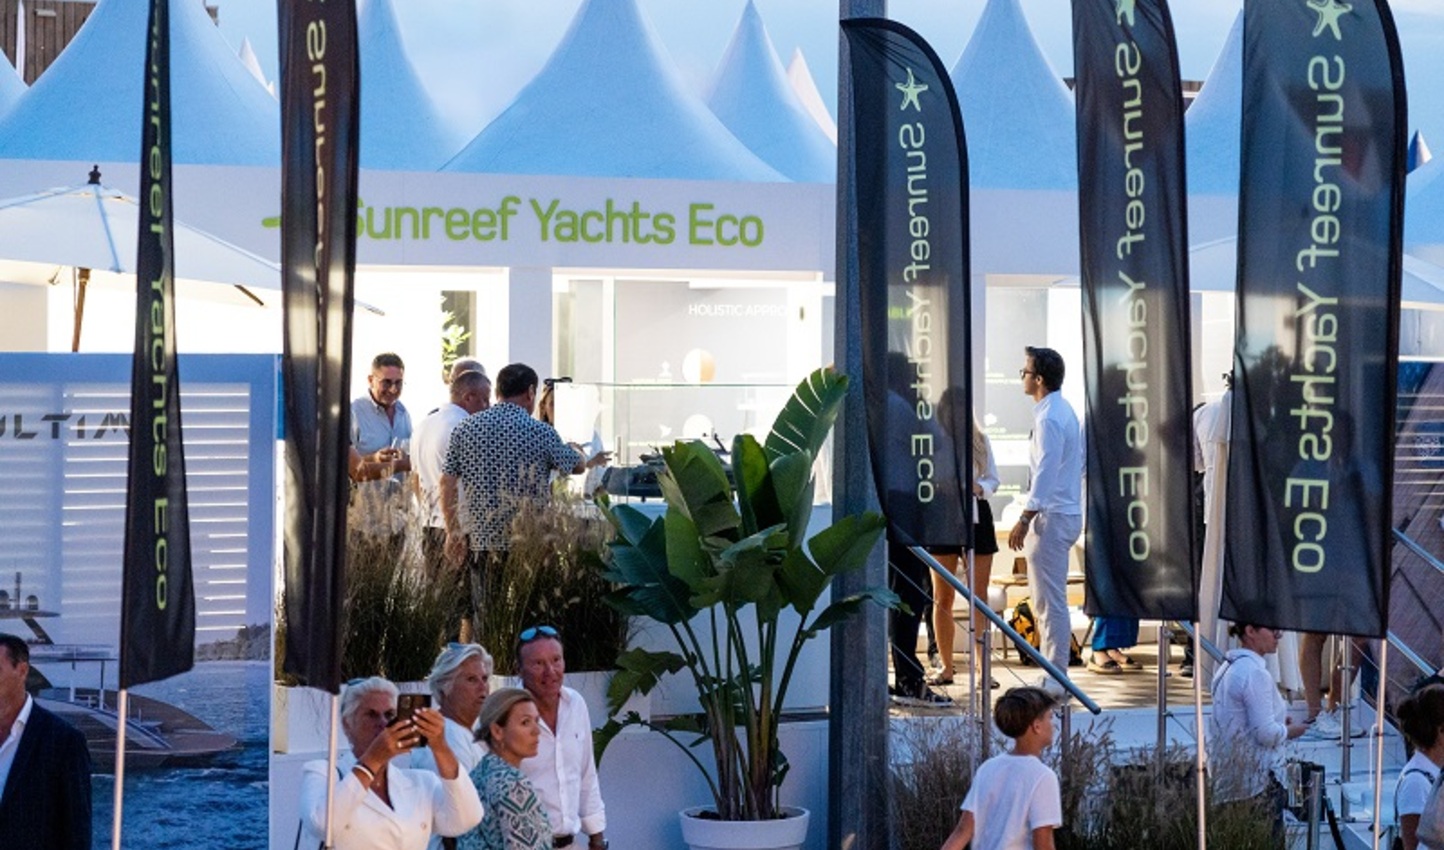 Sunreef Yachts at Cannes 2023: A Celebration of Sustainable Yachting